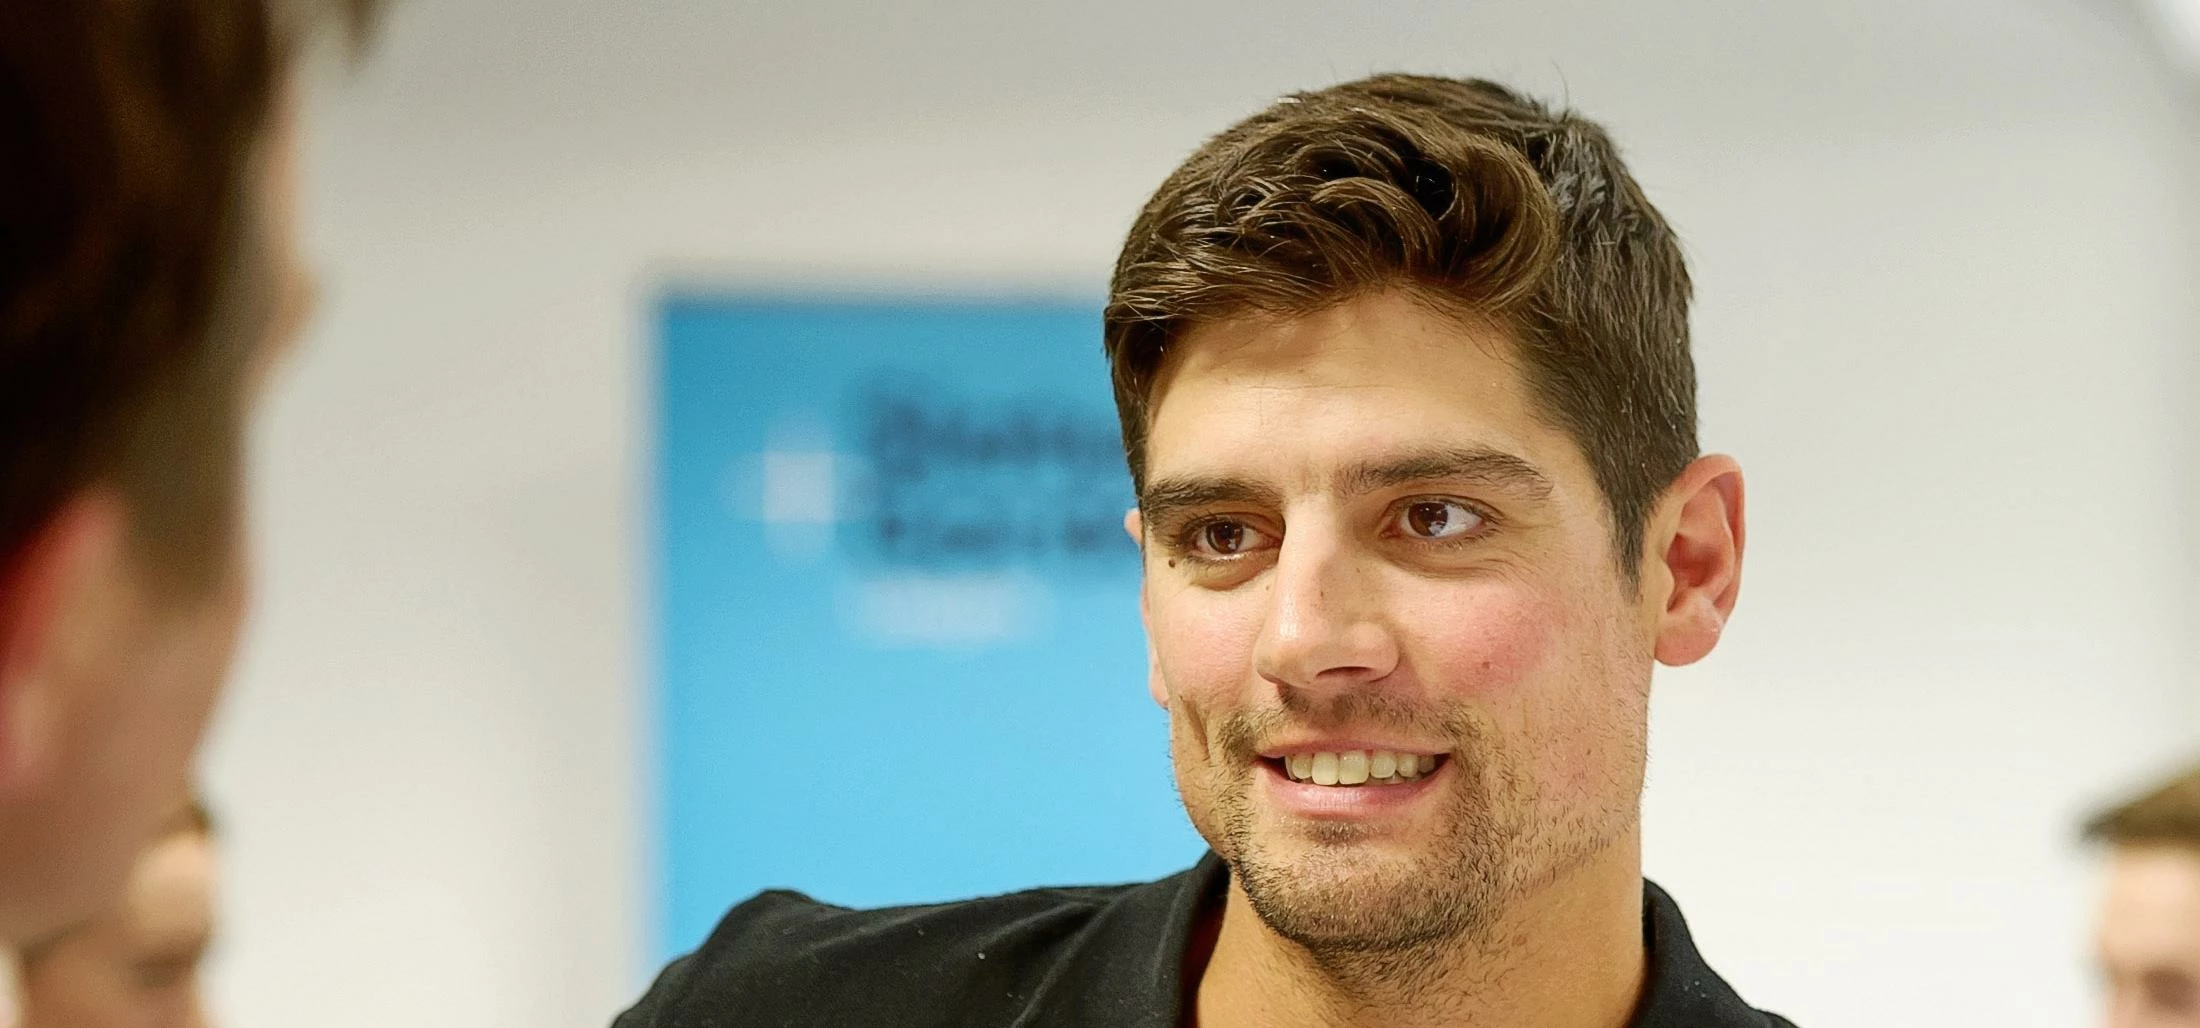 Alastair Cook at the launch of Slater and Gordon's new legal advice centre in Manchester